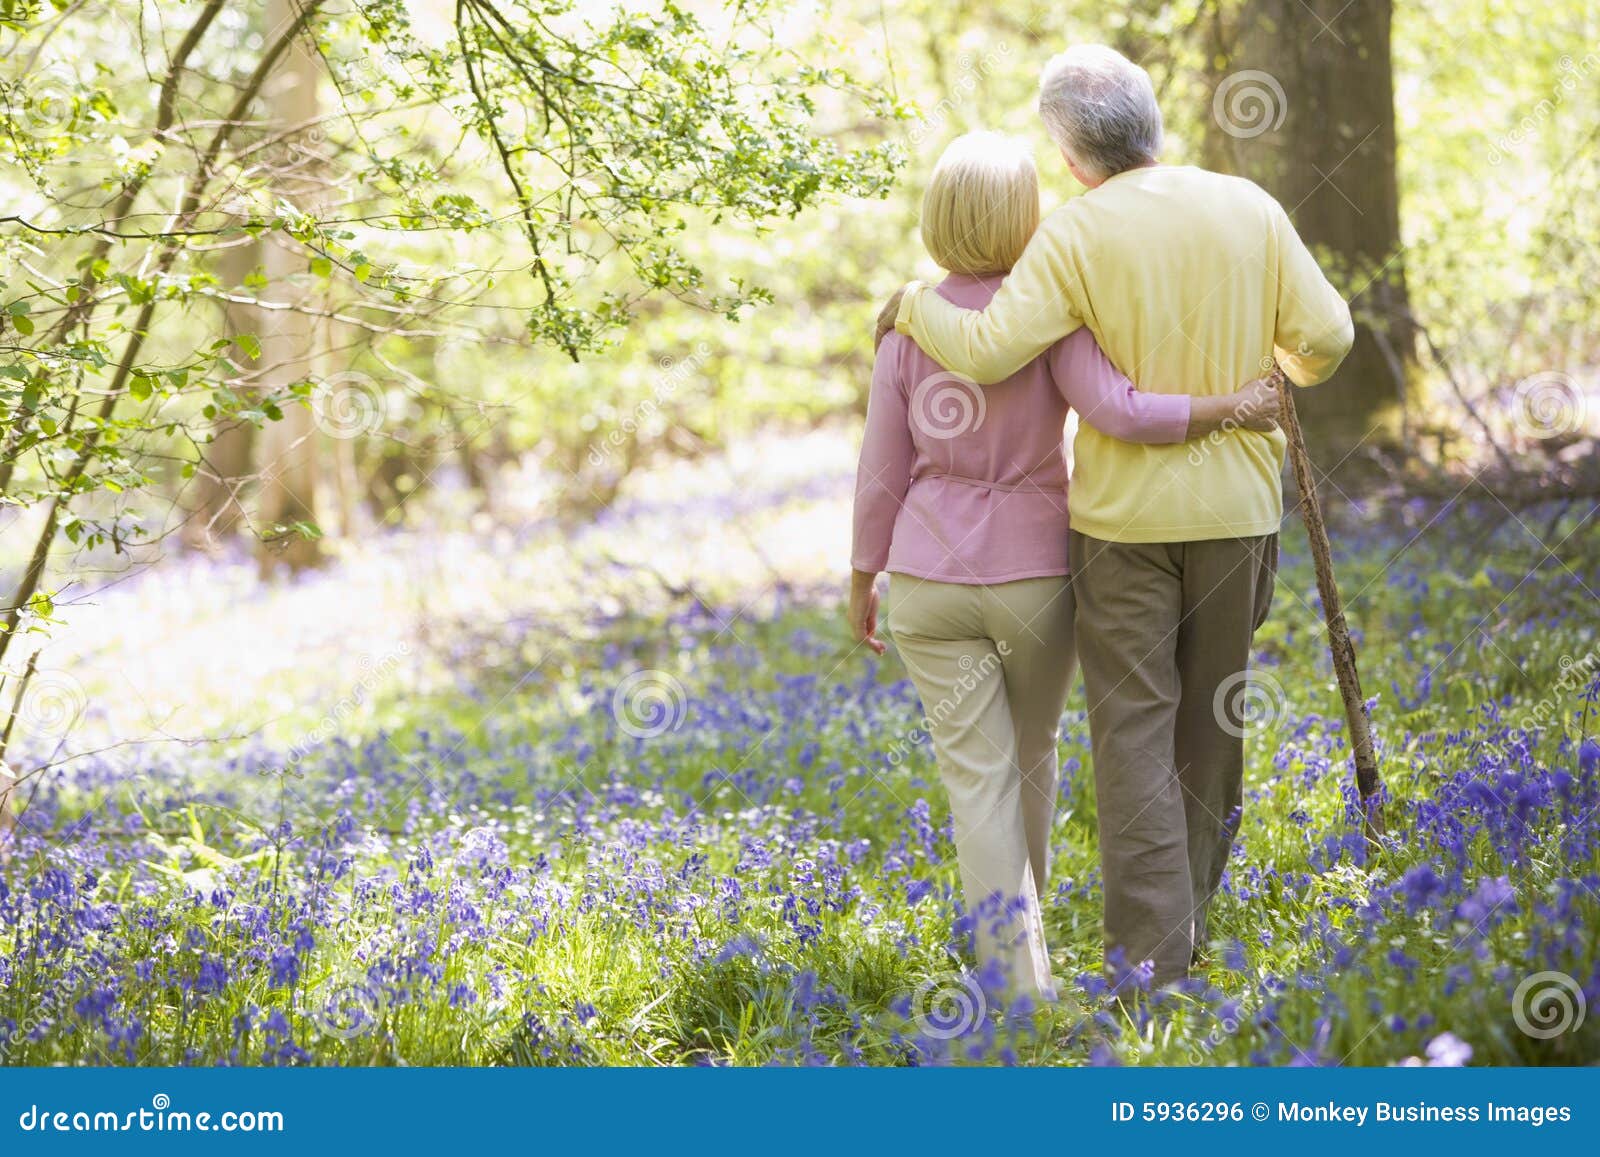 couple walking outdoors with walking stick